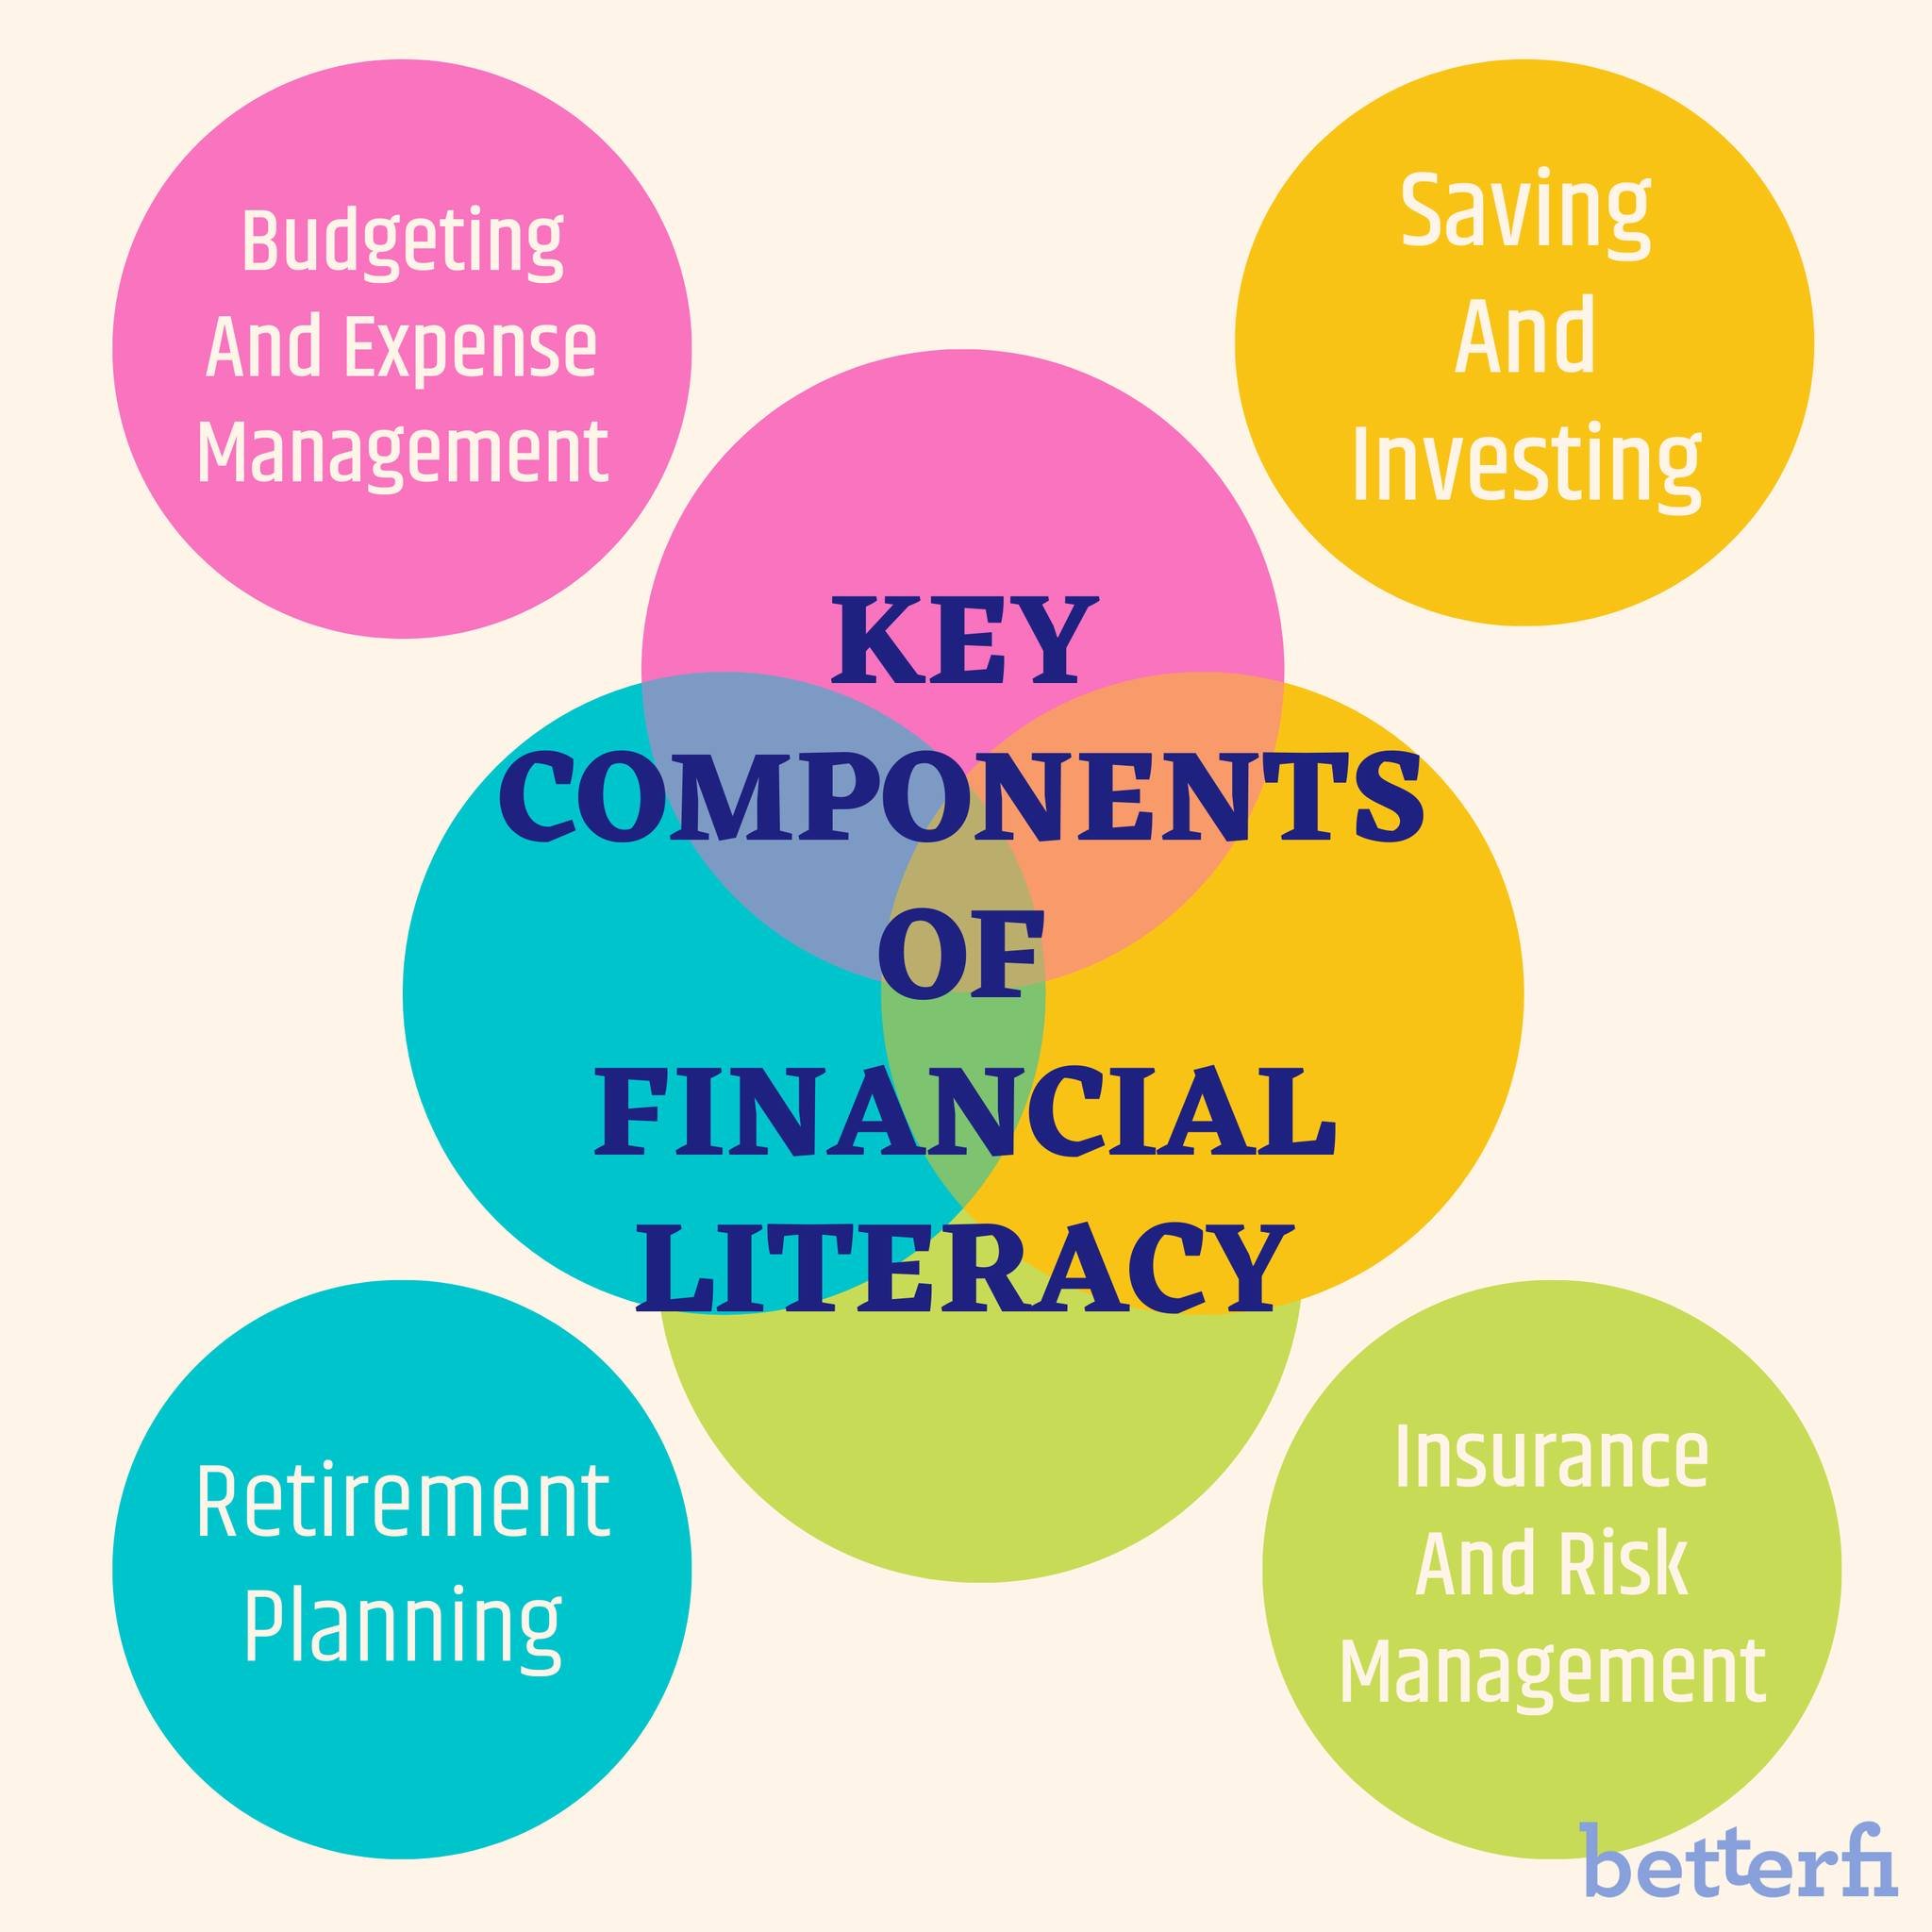 It's #financialliteracymonth! 

At BetterFi, we often focus on the &quot;Budgeting and Expense Management&quot; piece of financial fitness &ndash; and why not? For those with limited access to conventional financial services, everything is more expen